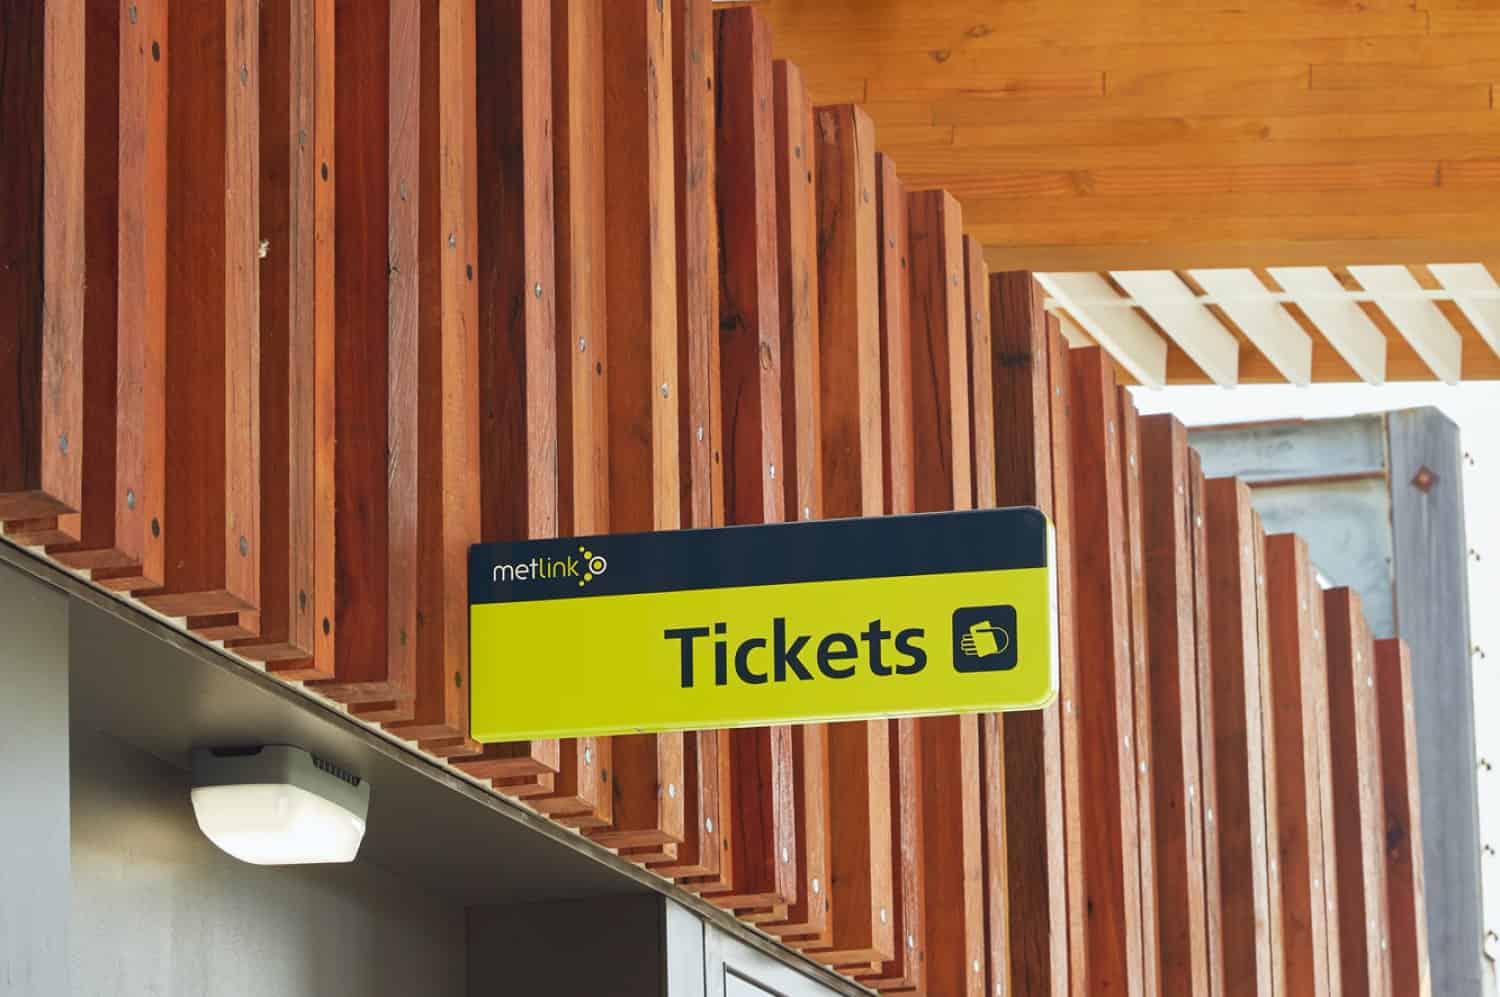 Railway Station public sector Upper Hutt Wellington closeup of the wooden structure design and a tickets sign